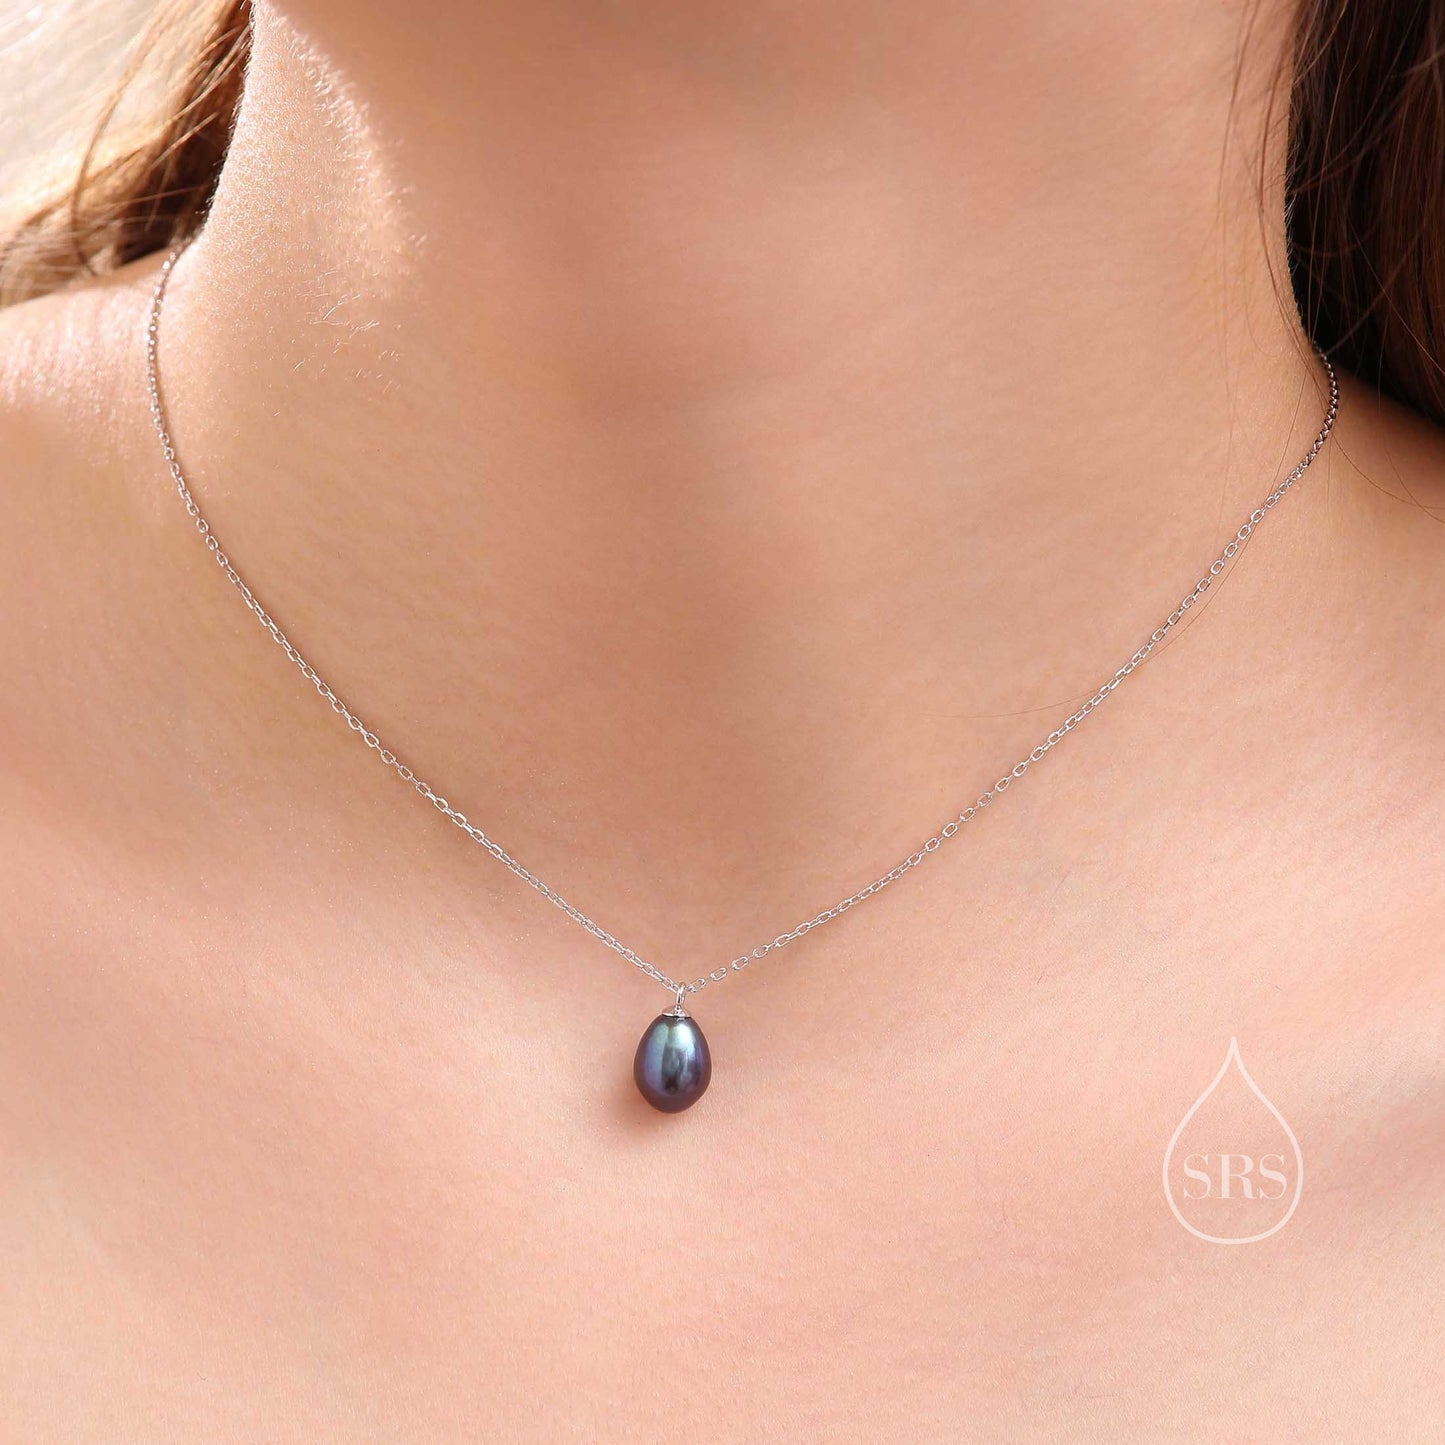 Natural Black Pearl Necklace in Sterling Silver,  Genuine Freshwater Pearl Pendant Necklace in Sterling Silver,  Minimalist Oval Pearl